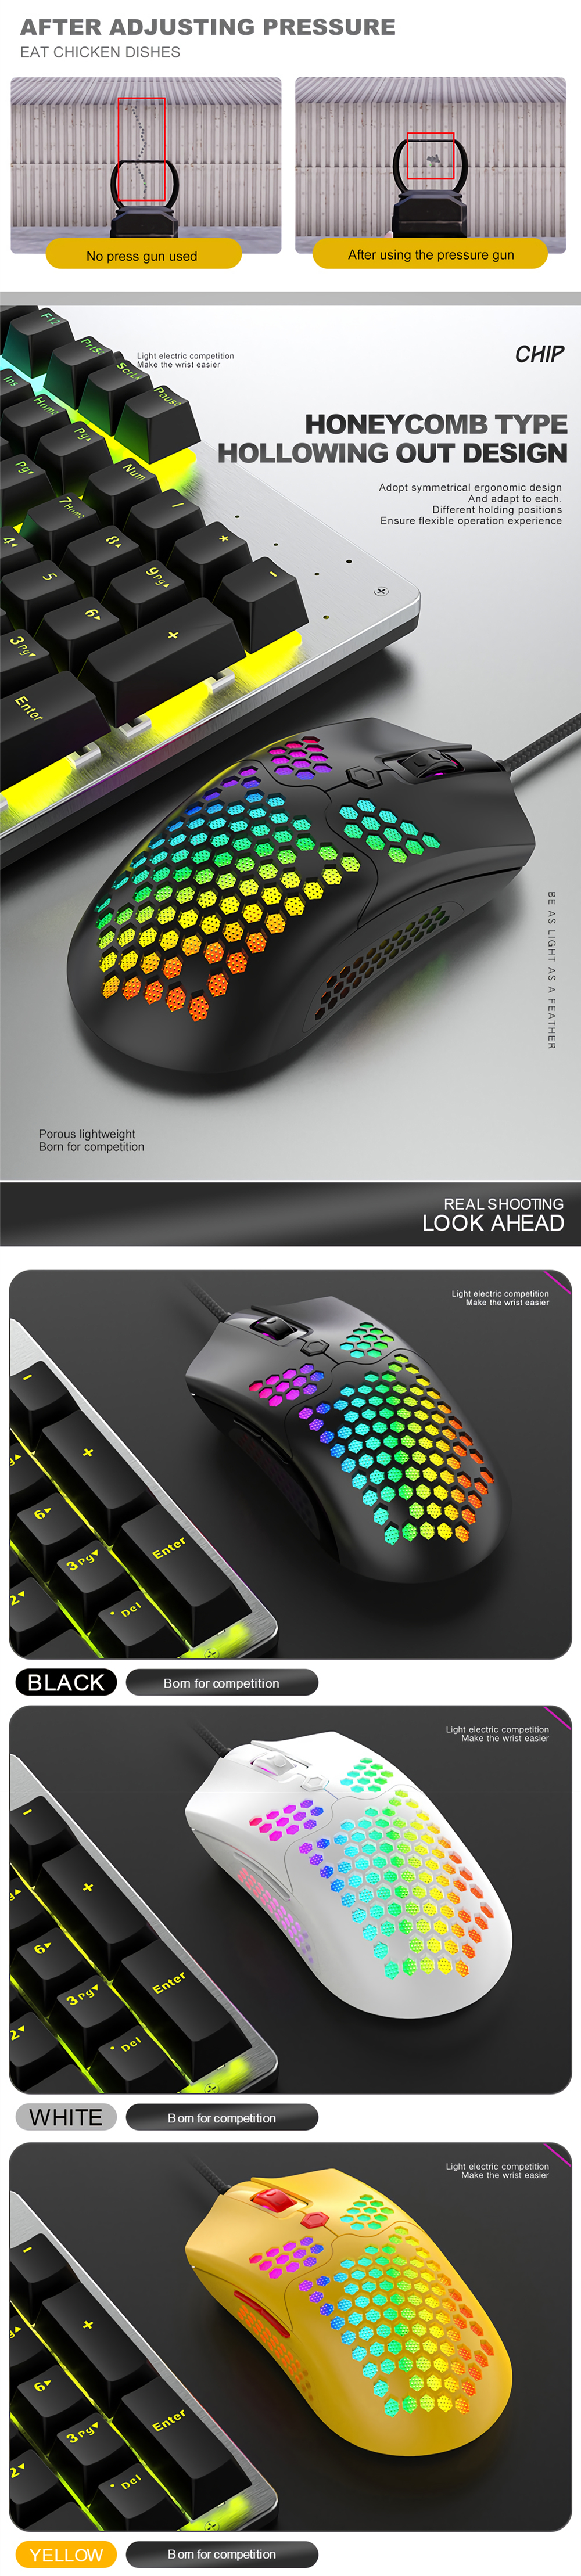 Free-wolf M5 Wired Game Mouse Breathing RGB Colorful Hollow Honeycomb Shape 12000DPI Gaming Mouse USB Wired Gamer Mice for Desktop Computer Laptop PC 15